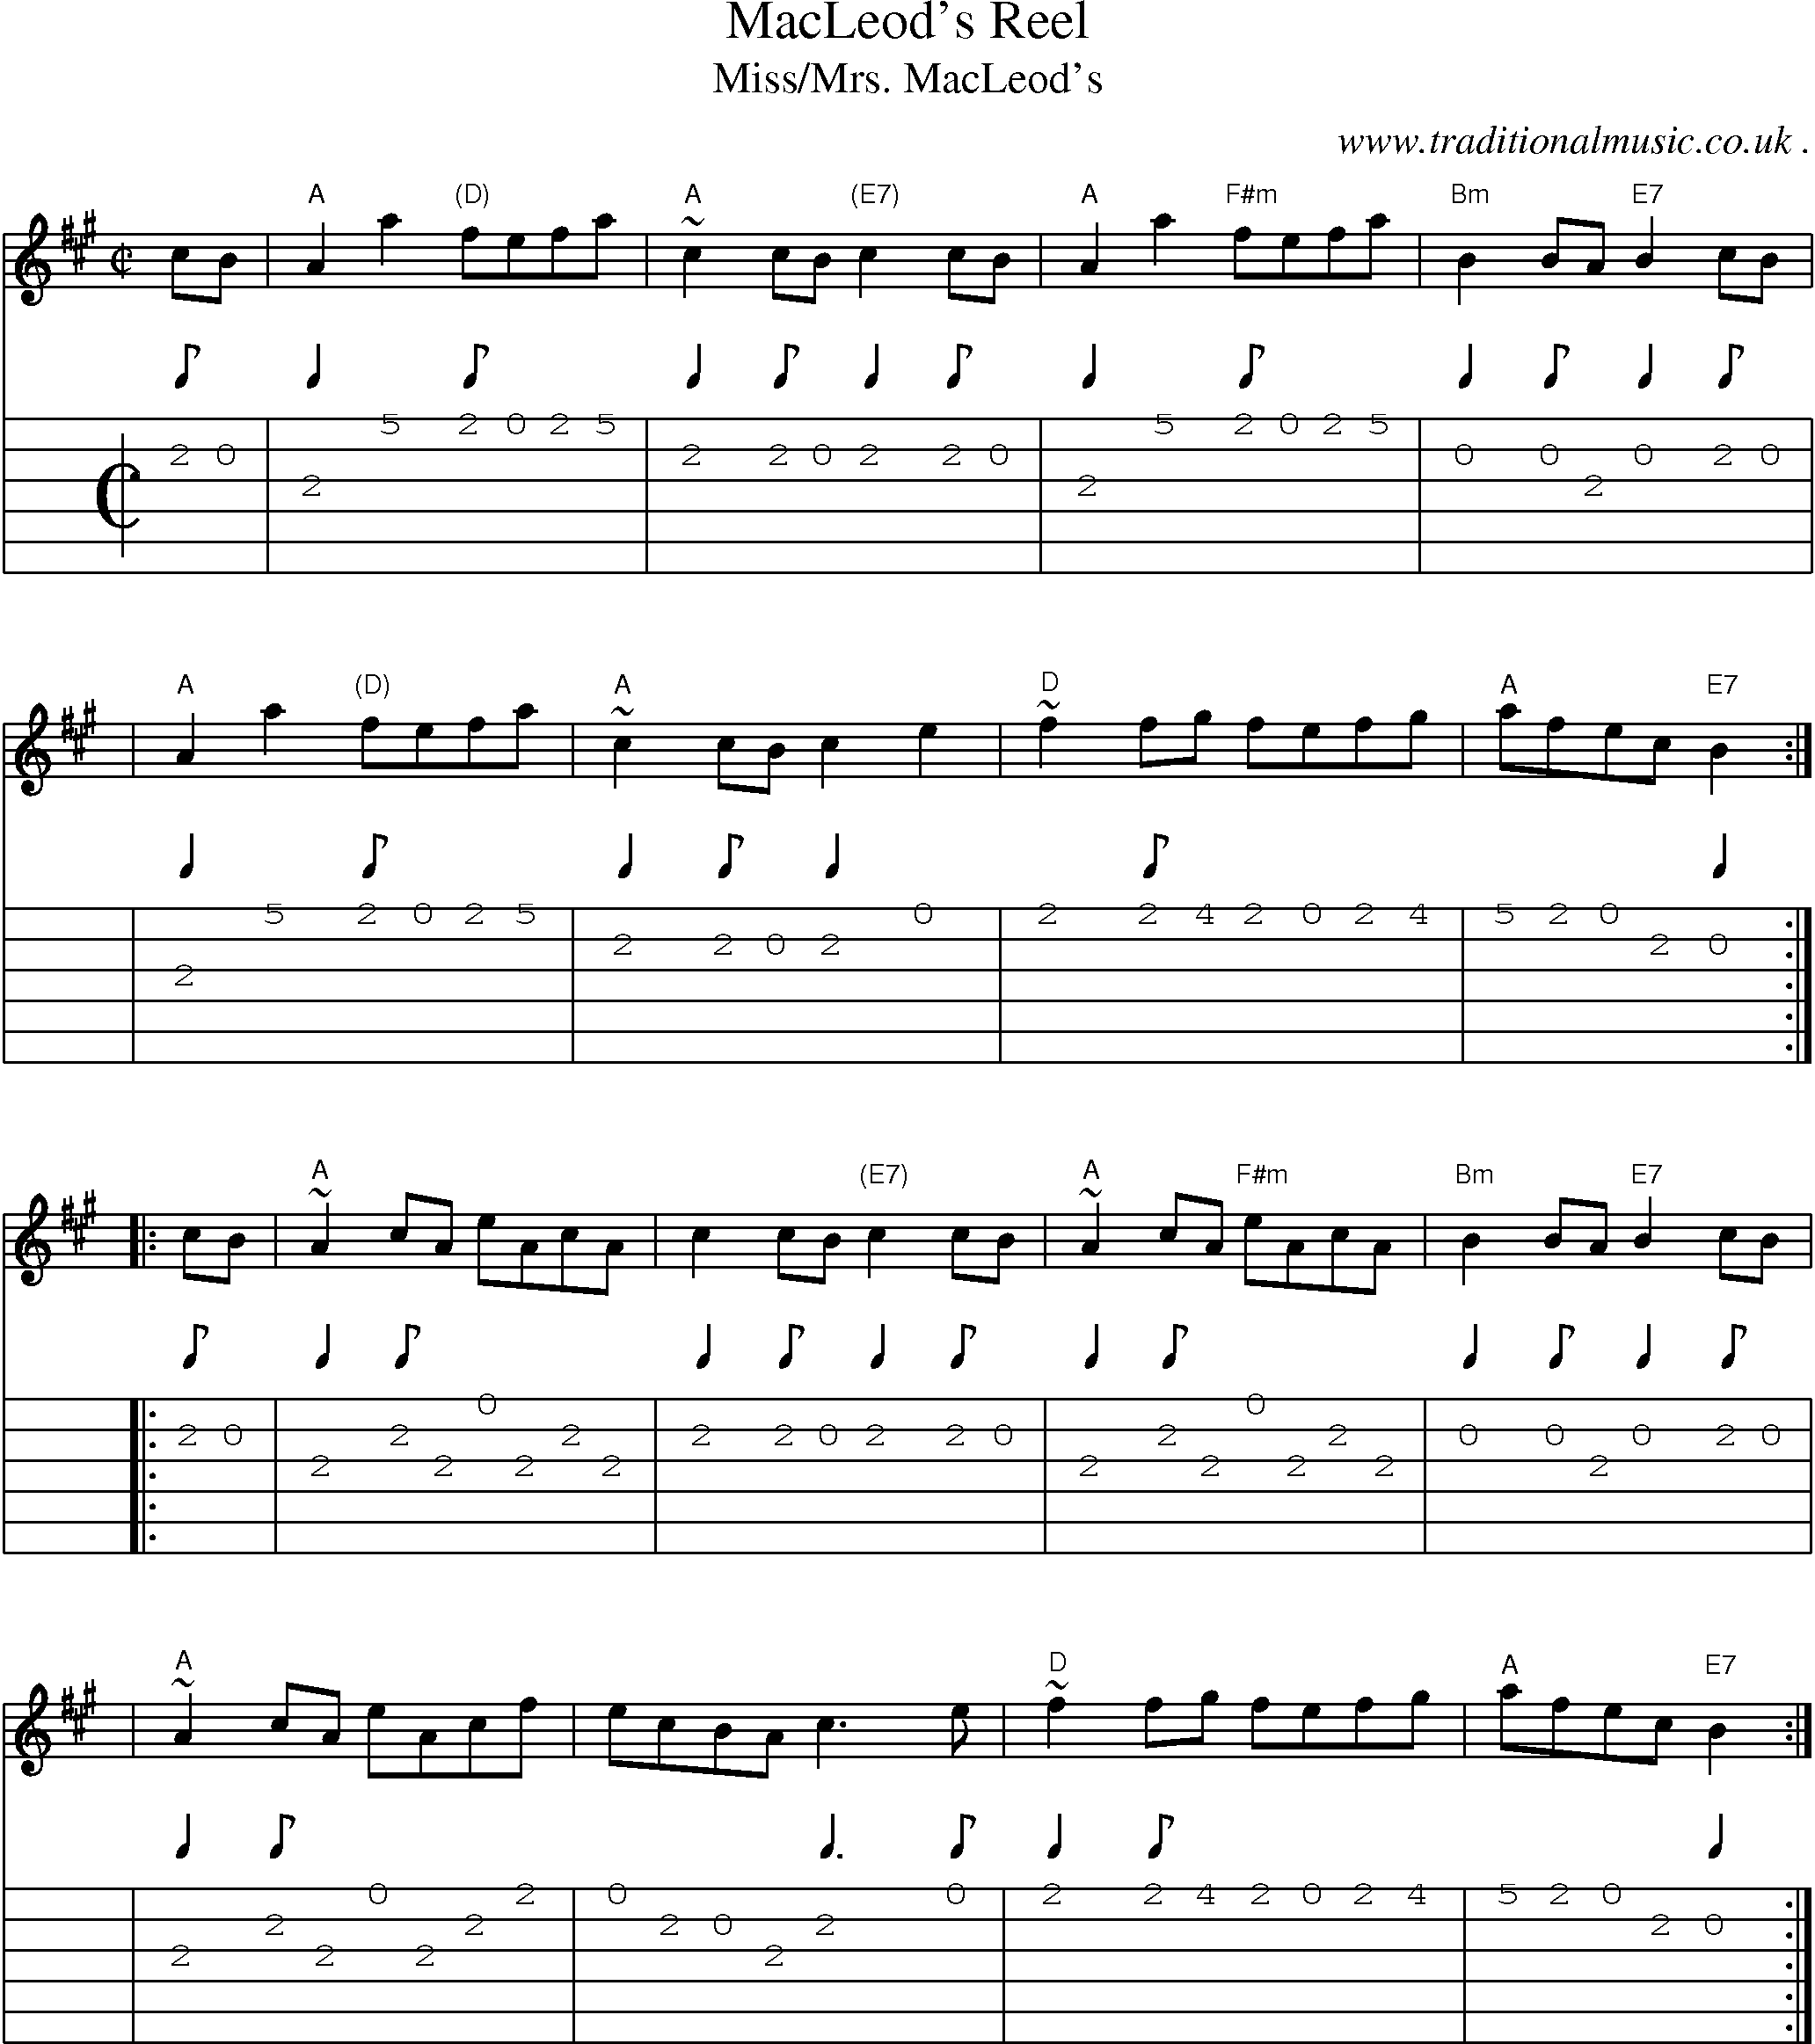 Sheet-music  score, Chords and Guitar Tabs for Macleods Reel